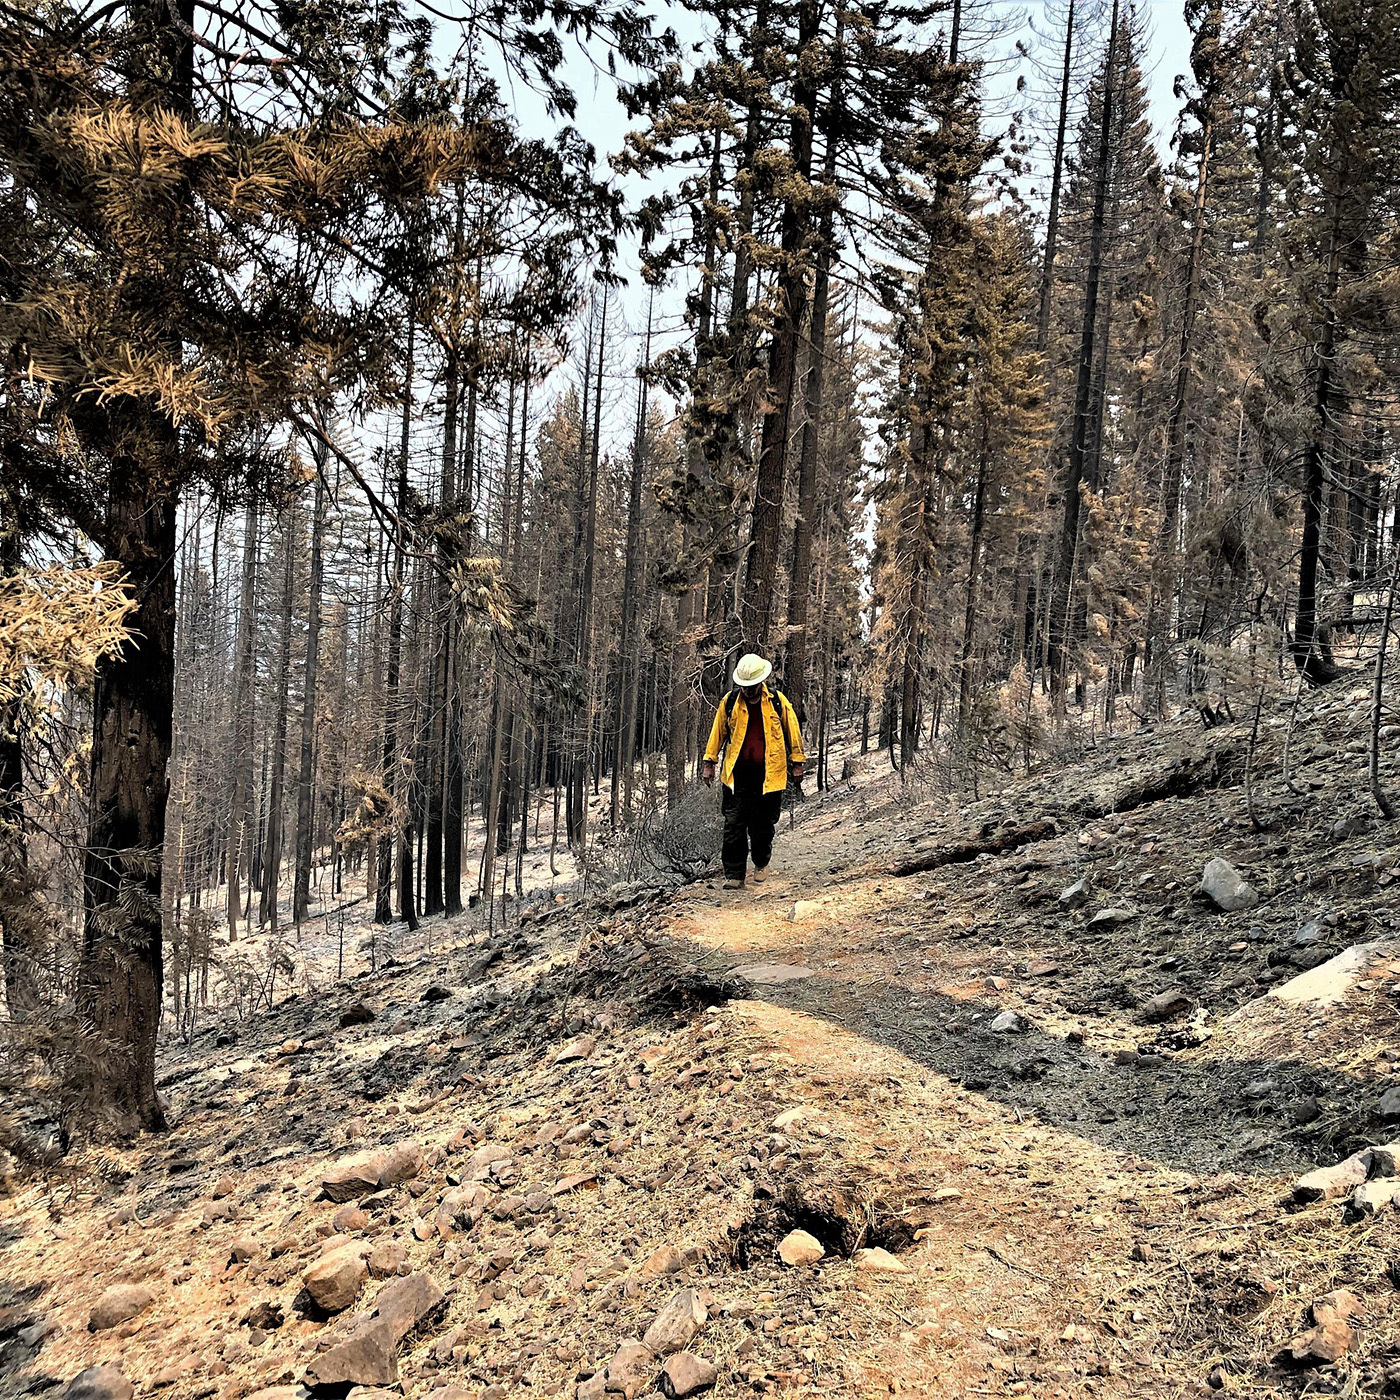 Assessing the response and condition of the watersheds along the Pacific Crest Trail in the Dixie Fire